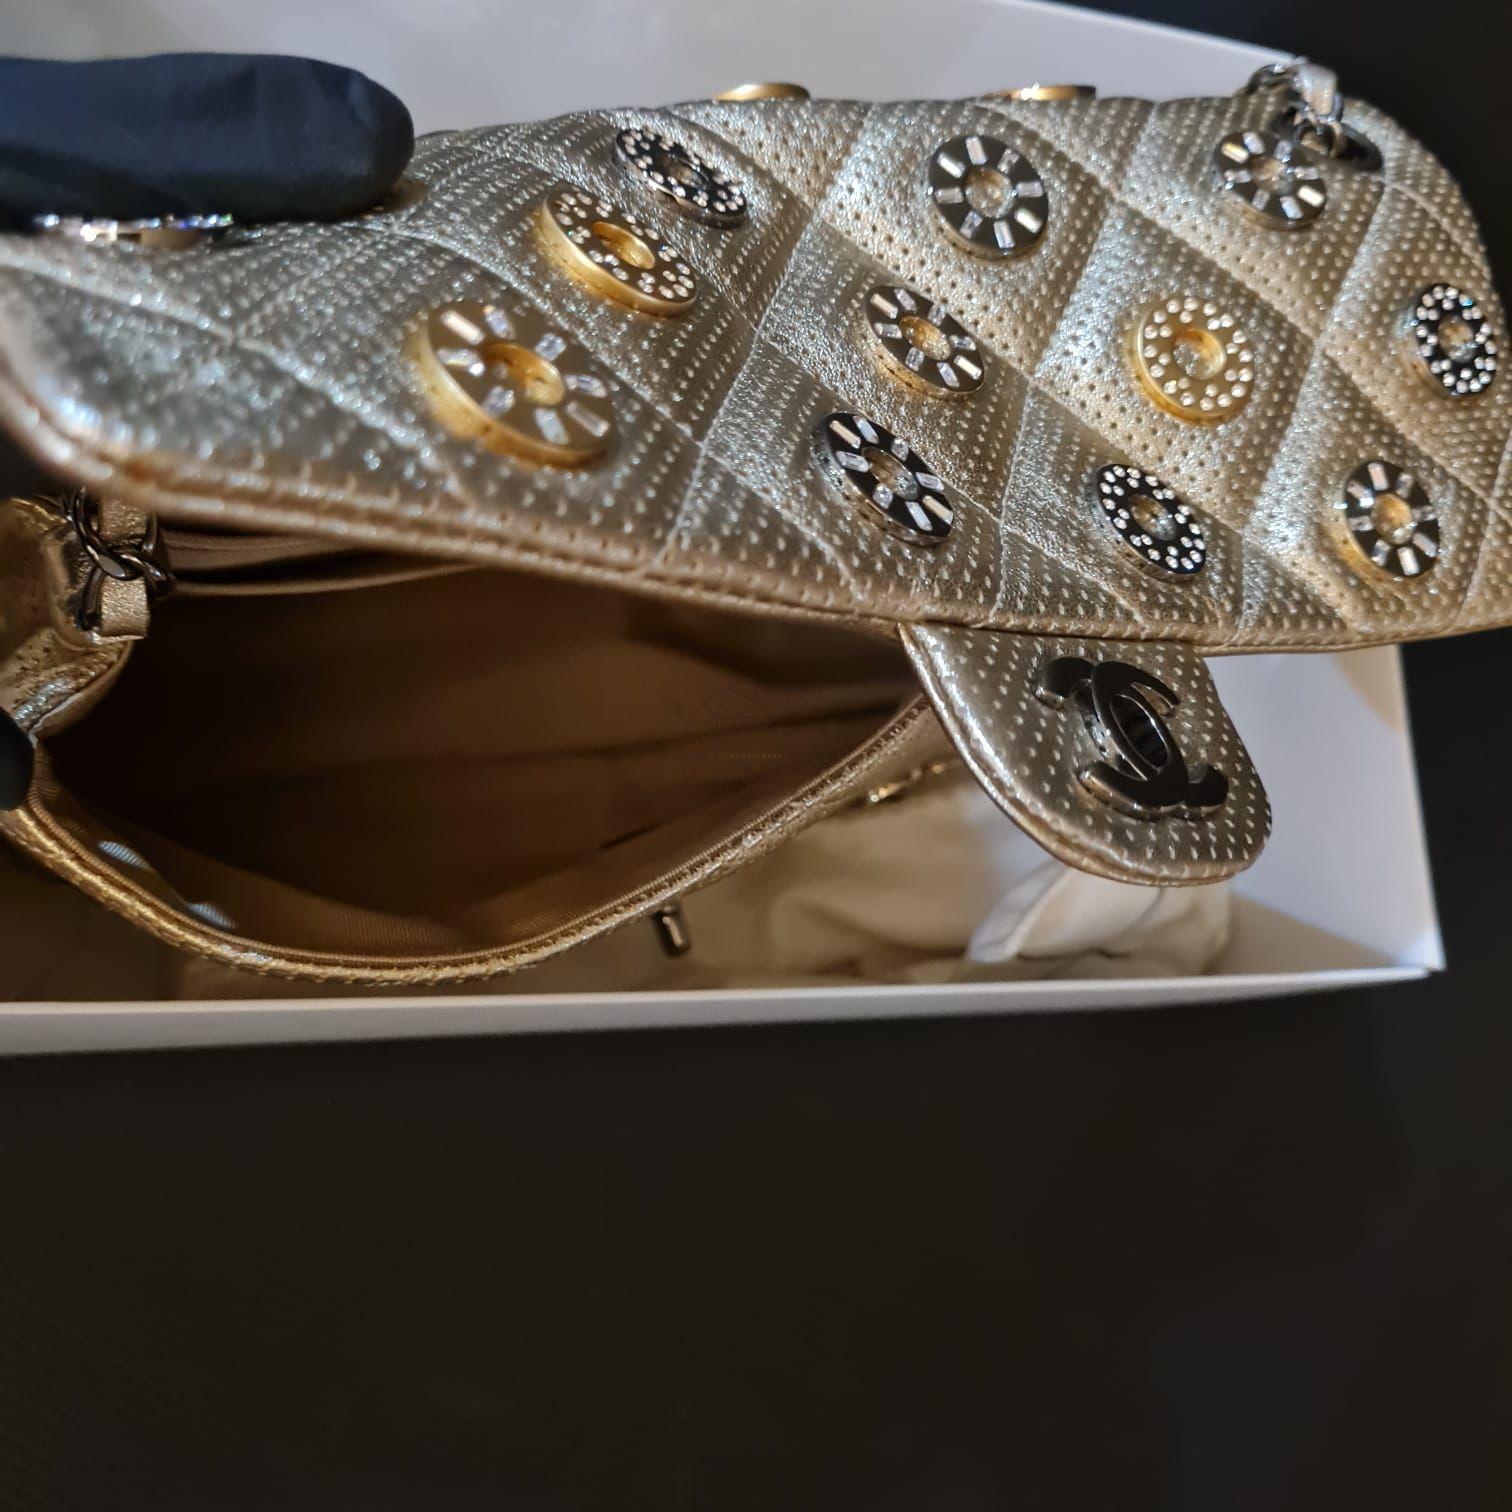 Rare classic coin embellished gold perforated bag from the Dubai collection. In amazing condition. A show-stopper bag for sure. Item series #20. Comes  with authenticity card, dust bag and box. 